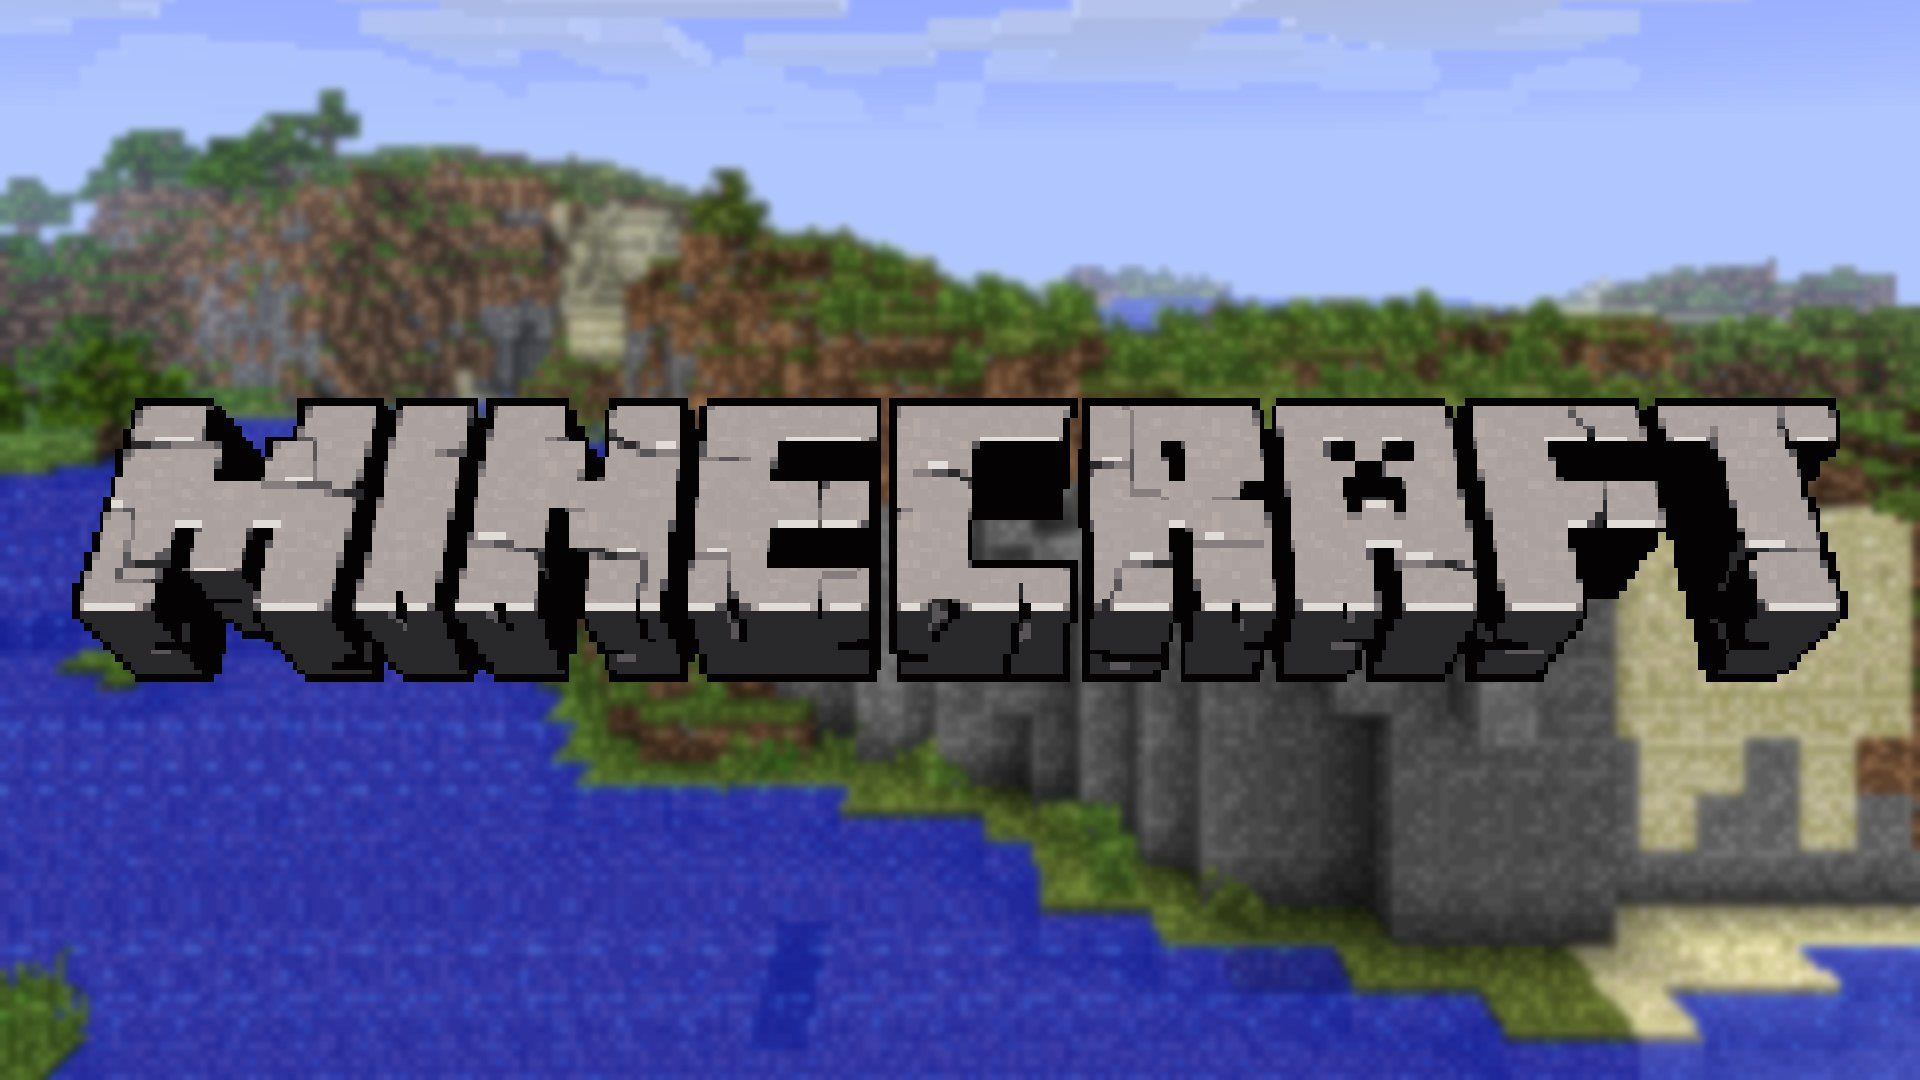 Minecraft Bedrock Edition Update 1.6.20 Is Crashing Minecraft And Is Even Causing Other Games To Malfunction